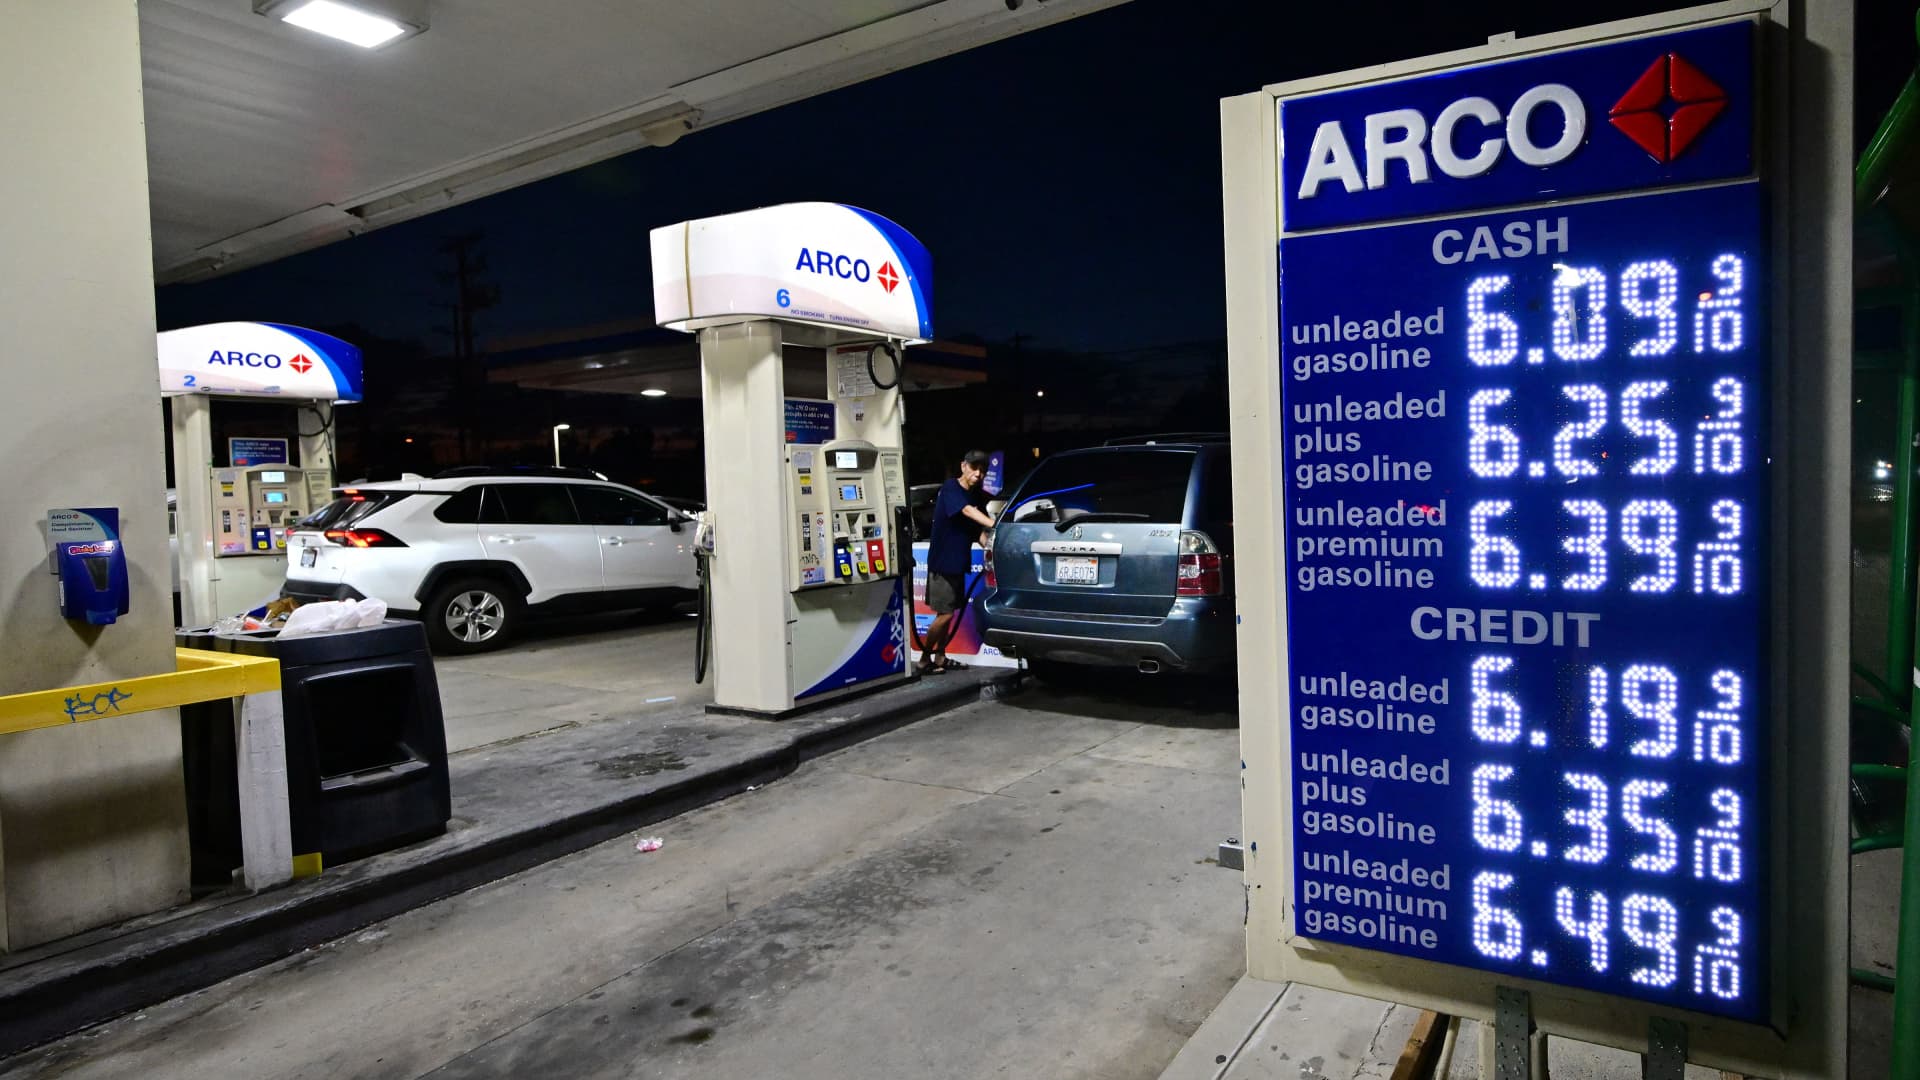 An Arco gas station displays the price per gallon at over $6 in Monterey Park, California on June 22, 2022.